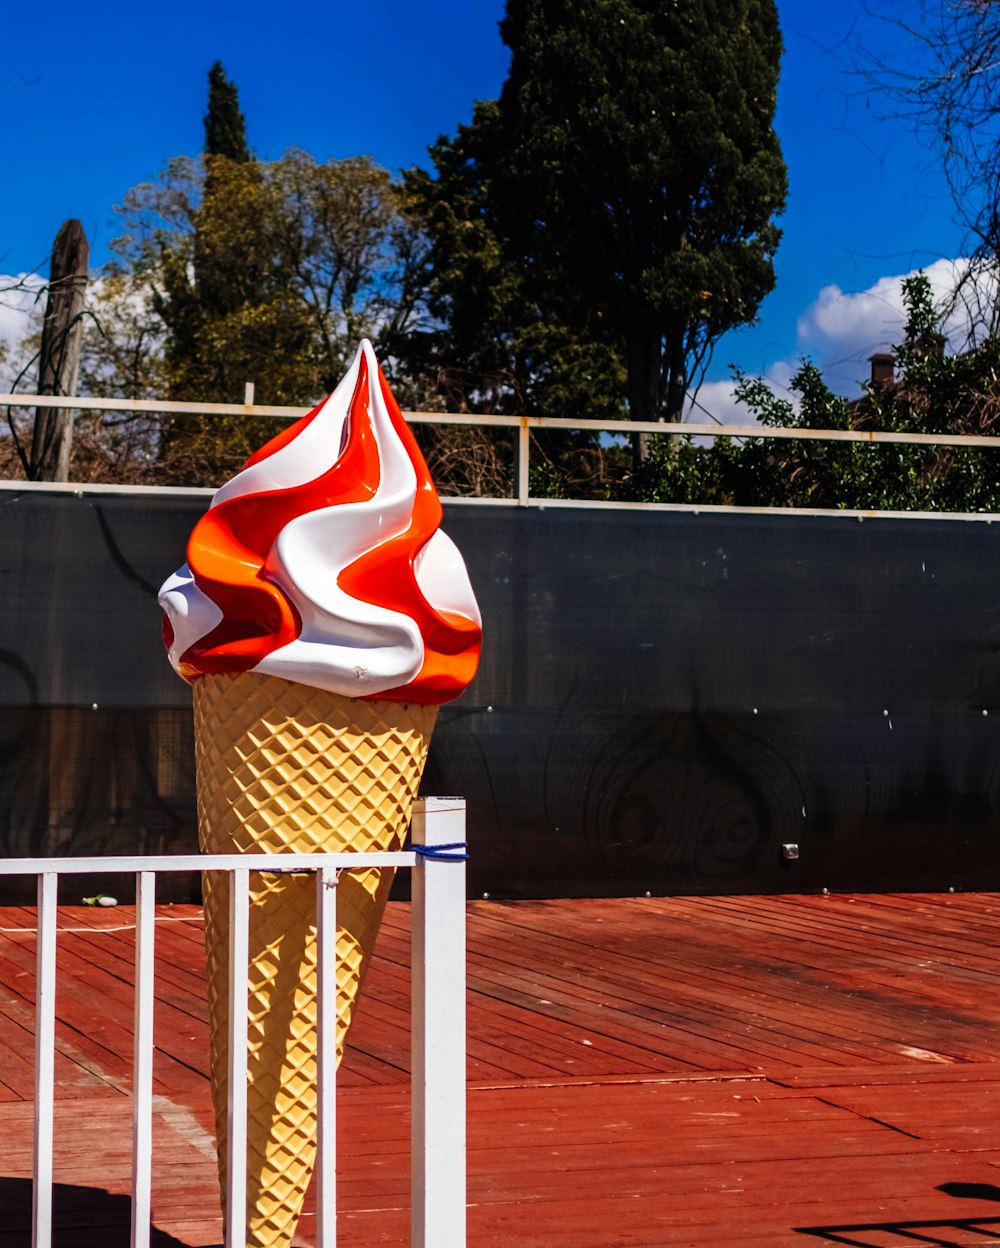 ice cream cone figure leaning on the railing